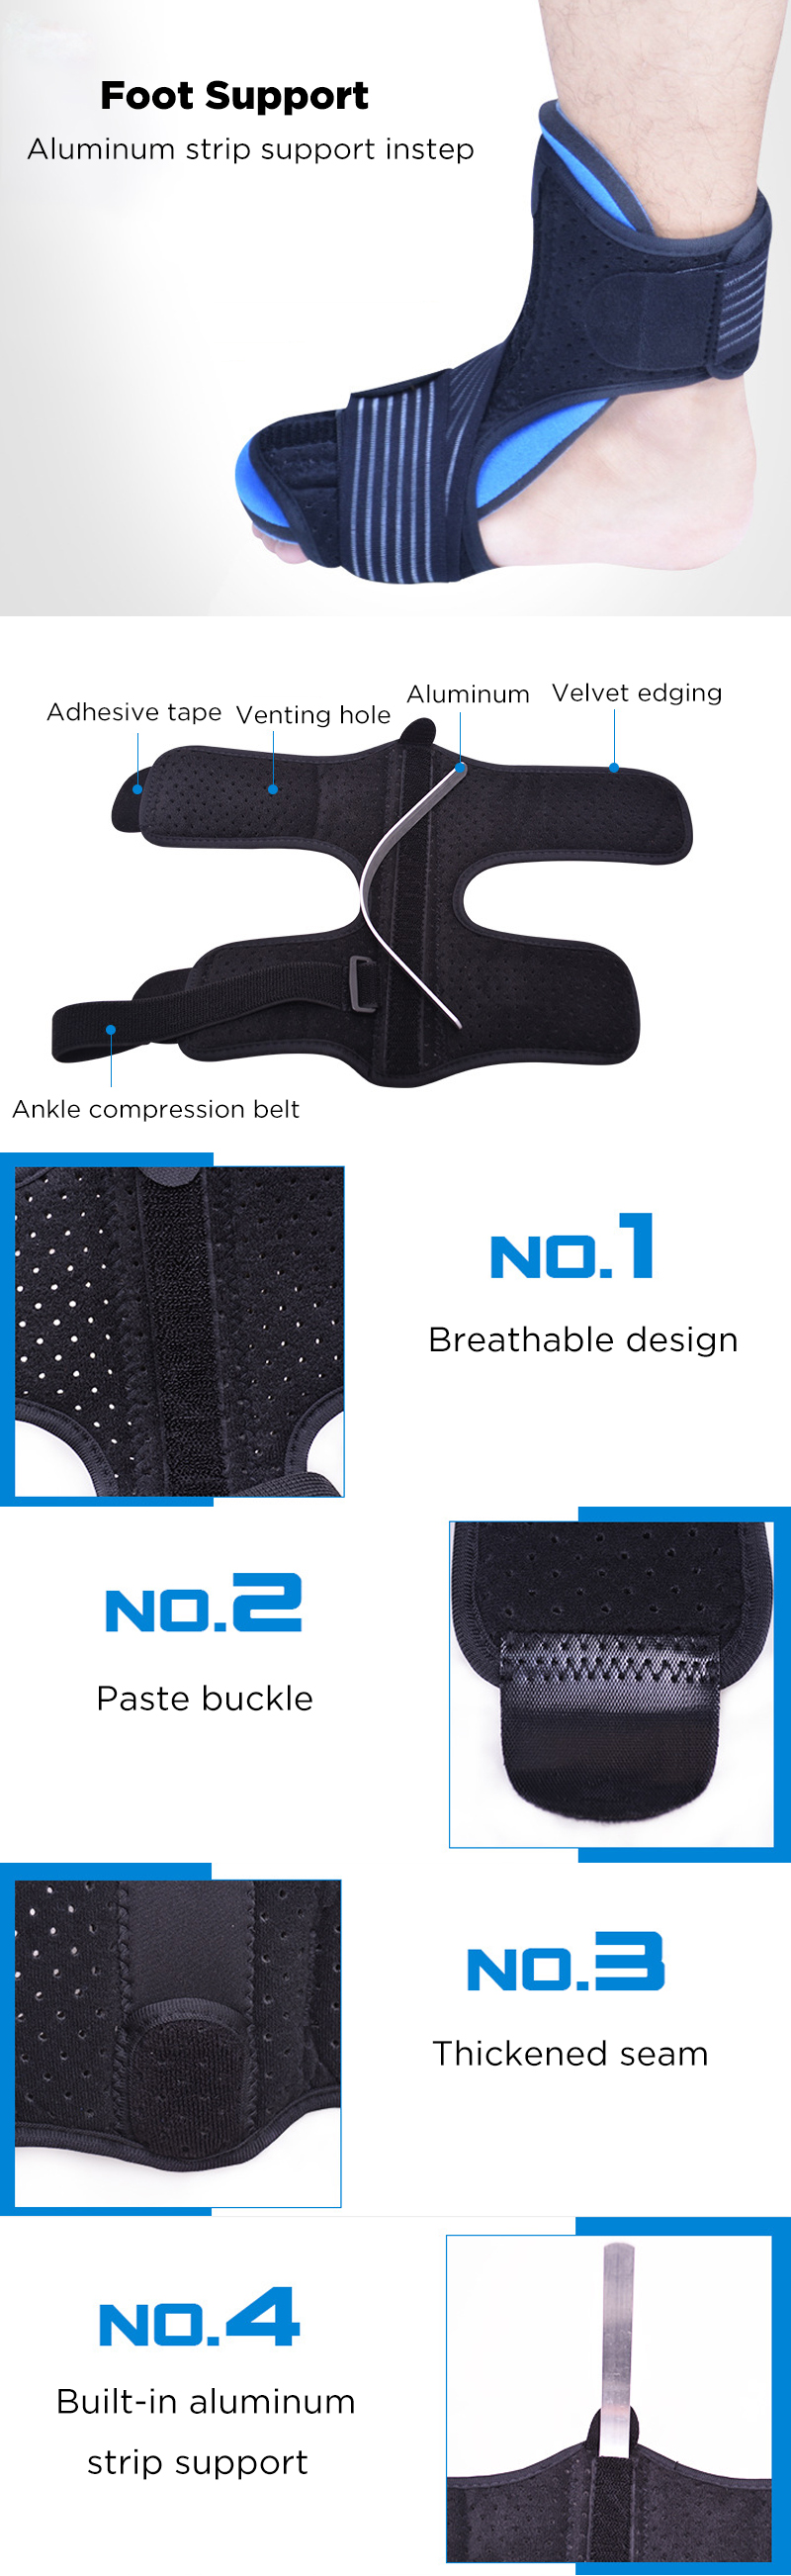 1-Pcs-Foot-Support-Breathable-Ankle-Guard-Injury-Wrap-Elastic-Strap-Protector-1535869-1